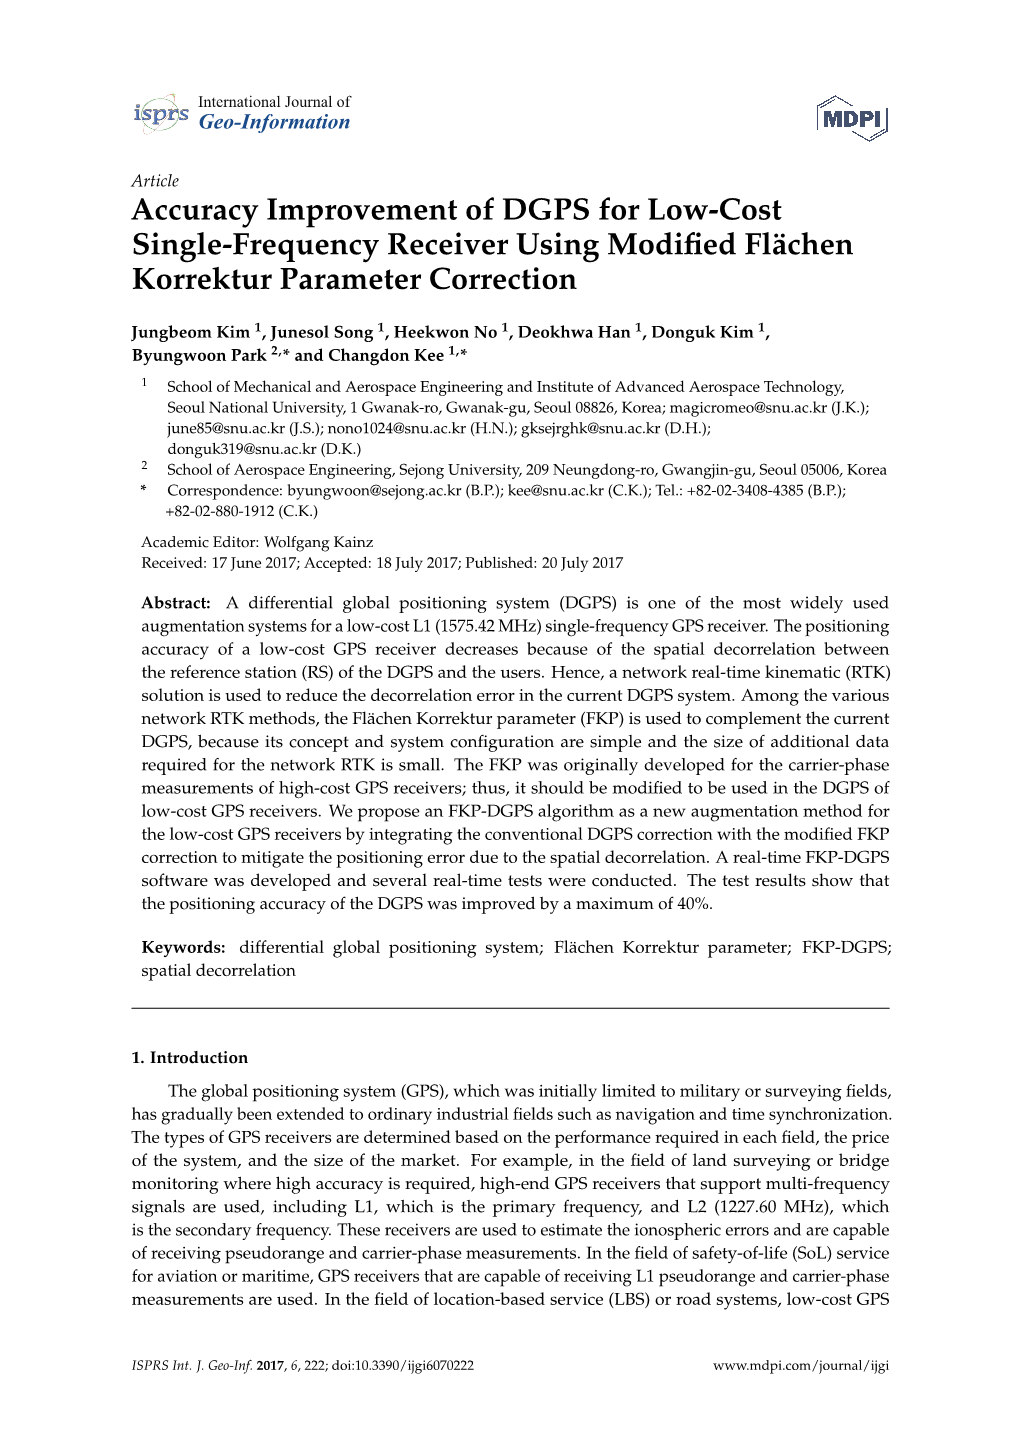 Accuracy Improvement of DGPS for Low-Cost Single-Frequency Receiver Using Modified Flächen Korrektur Parameter Correction